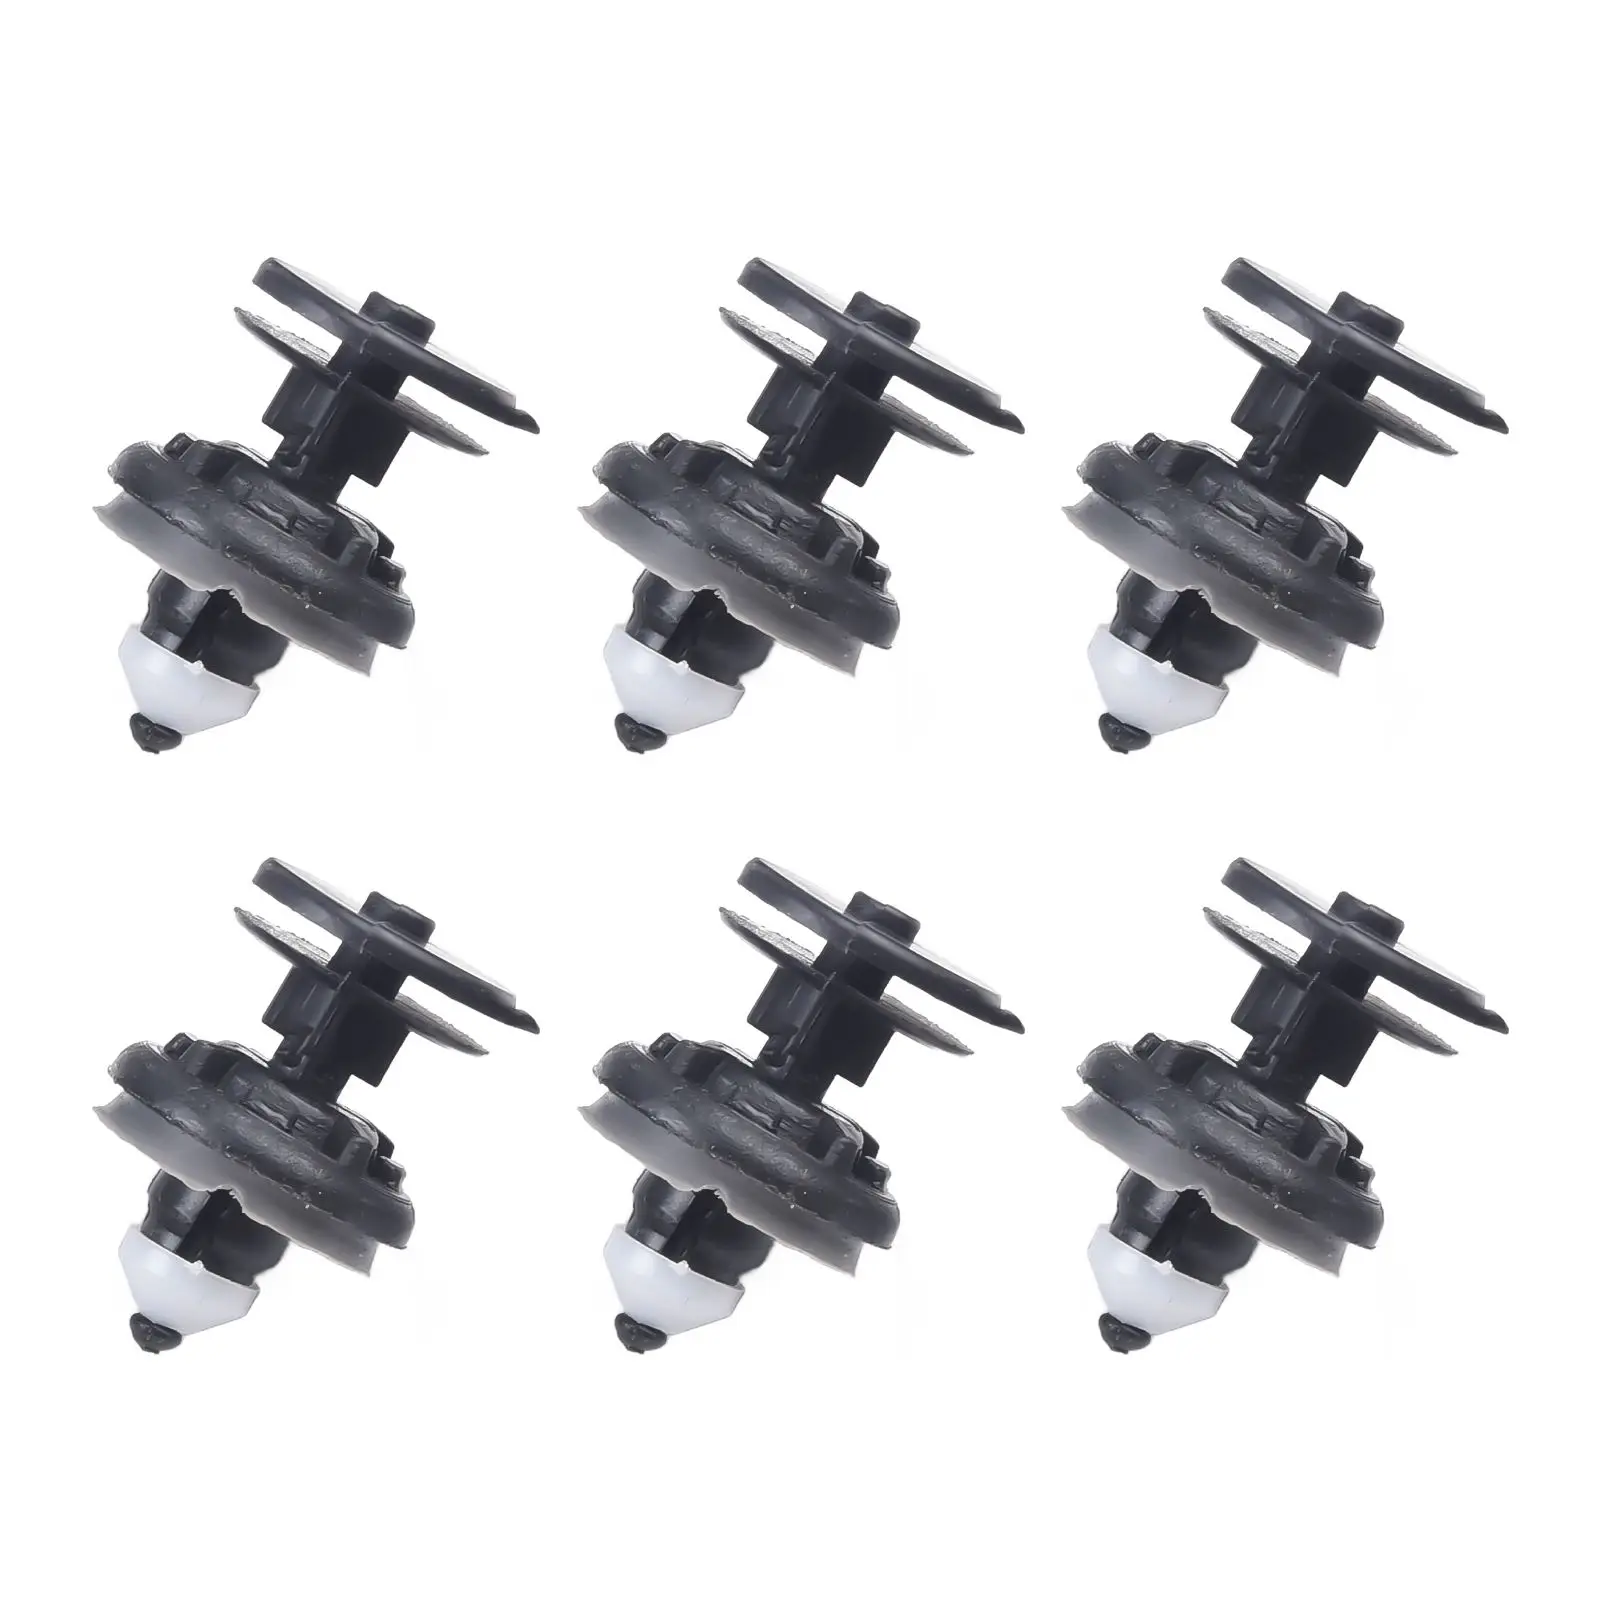 

Fastener Car Door Trim Clips Fast And Permanent Fastening Pressed Rivet Pin W709004-S300 Fit 8mm Hole Diameter